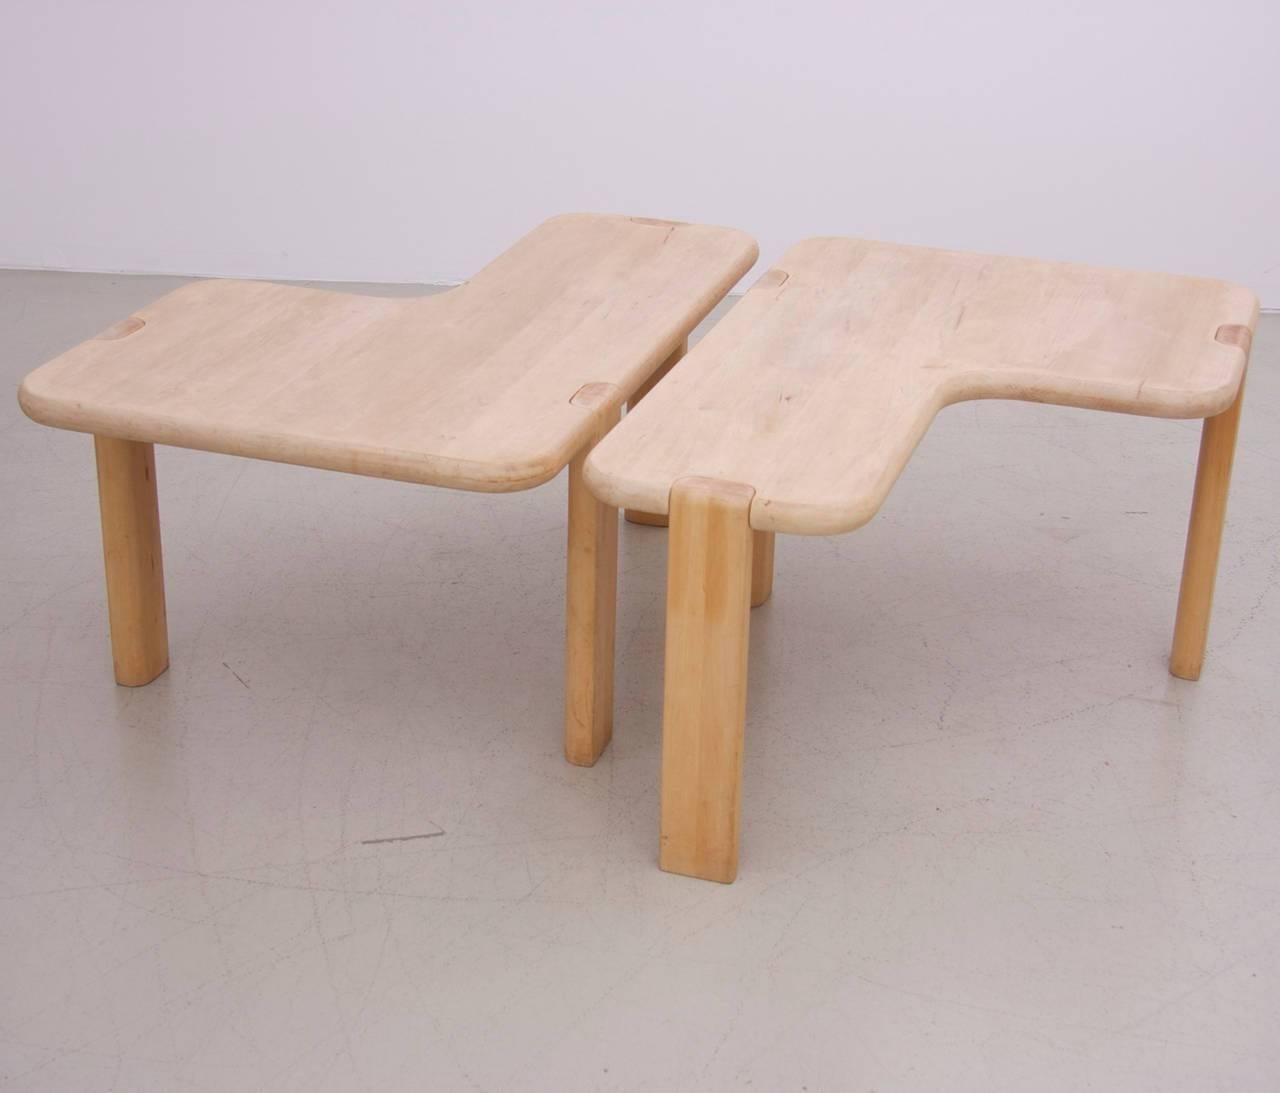 Beautiful Kjersgaard boomerang / freeform coffee table set. Very heavy coffee quality! All connections are strong.